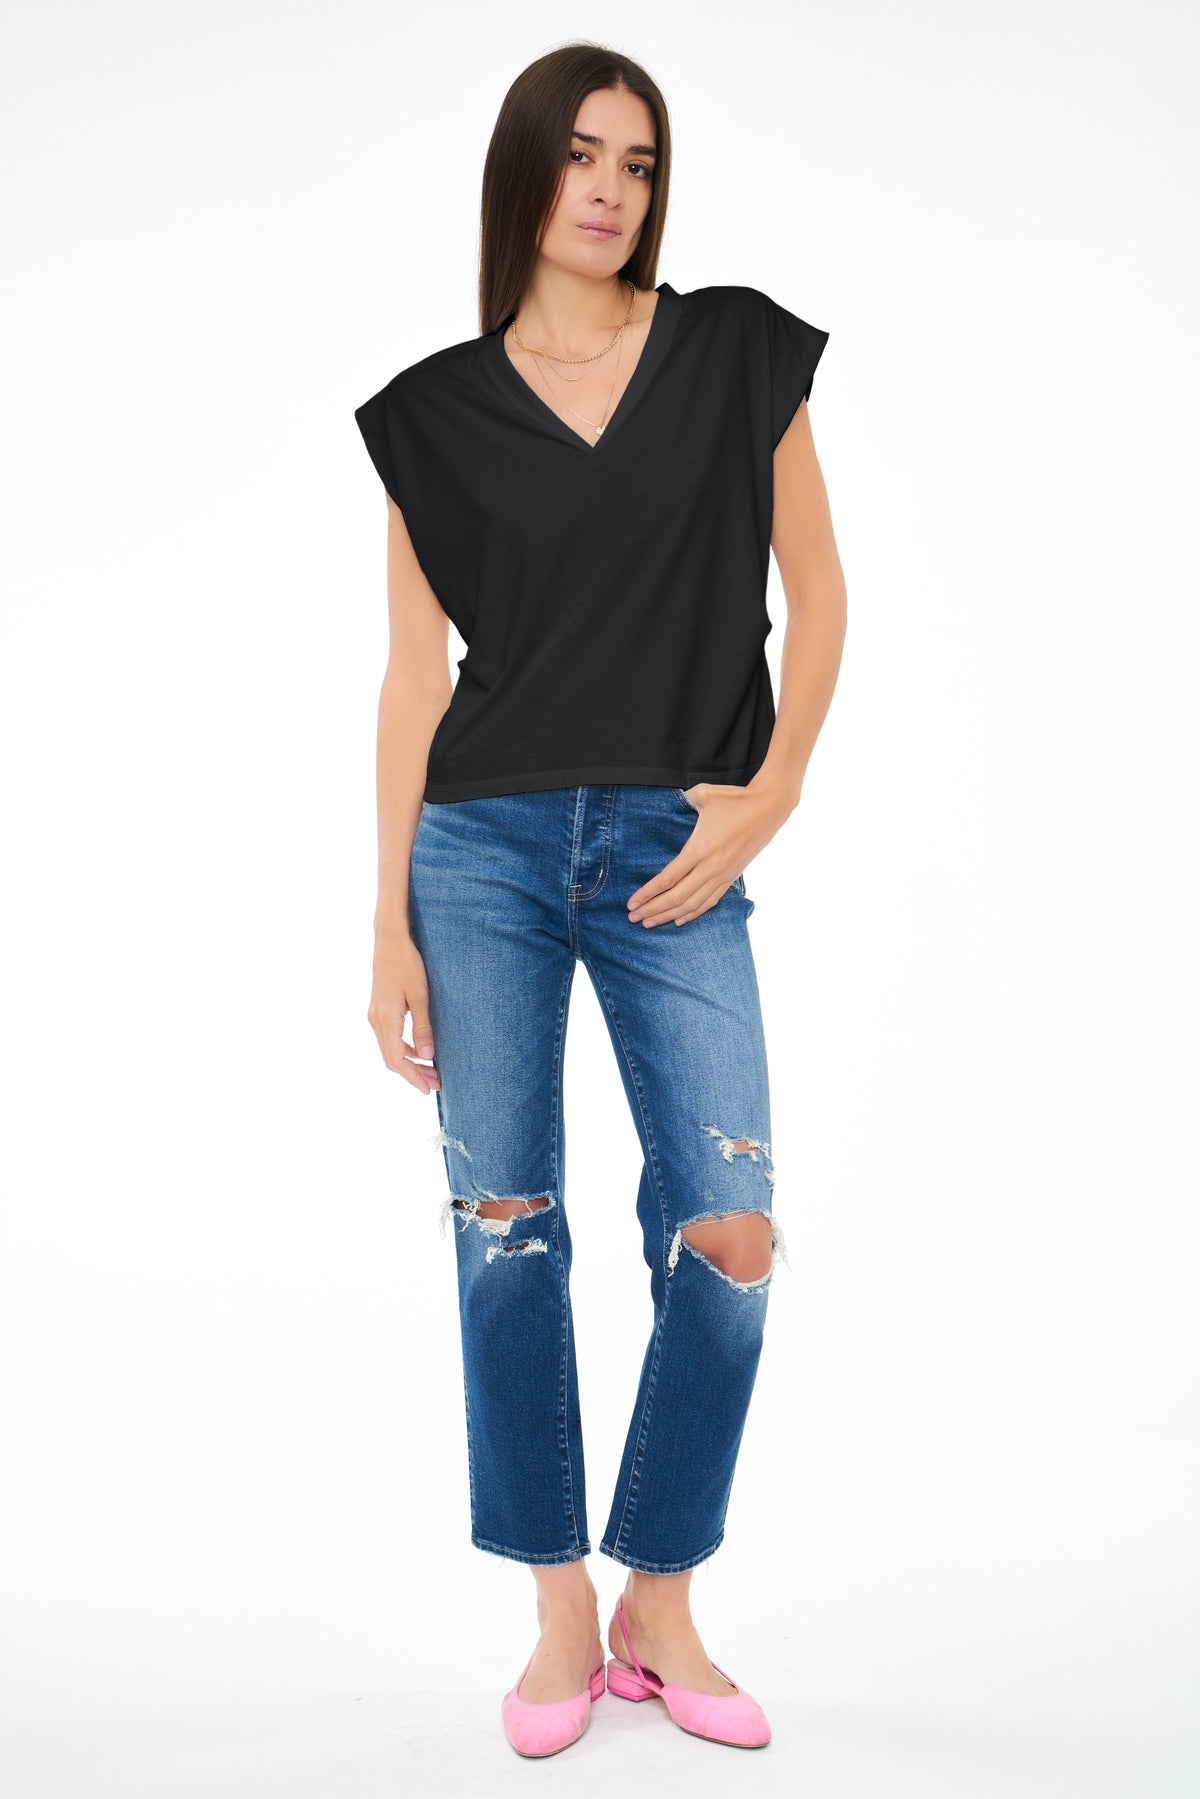 Carson V-Neck Muscle Tee - Black